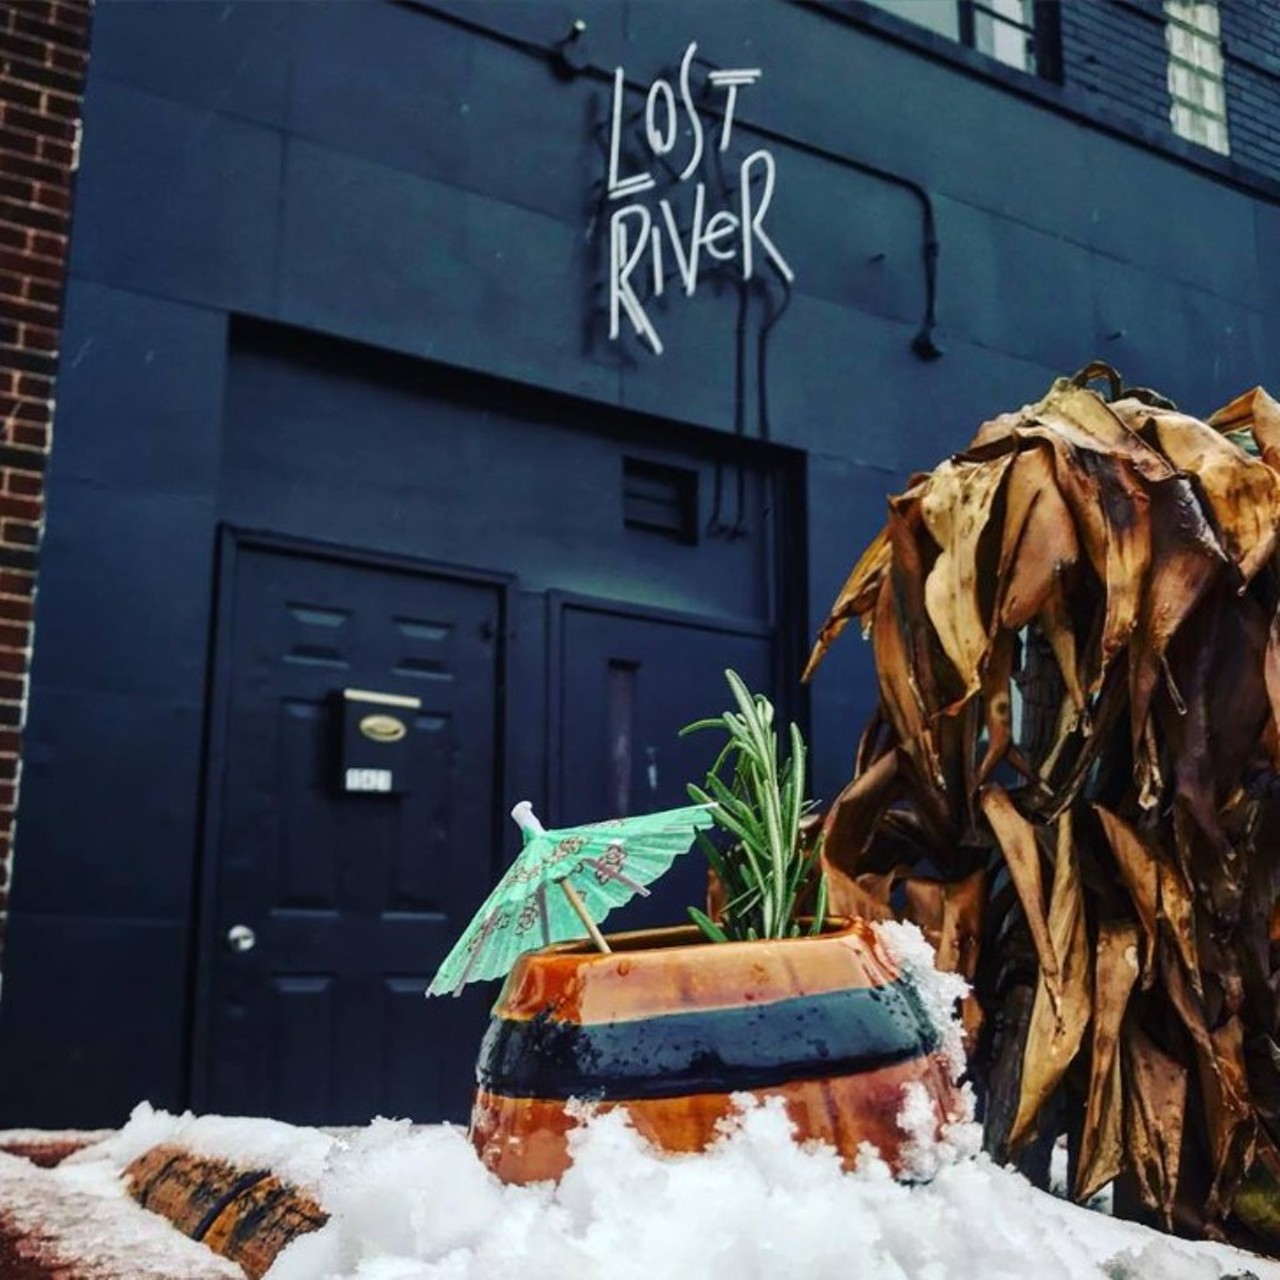 Lost River
15421 Mack Ave., Detroit
Near-nightly food pop-ups and a luscious setting have helped the east side's newest tiki bar quickly become one of the hottest spots in the city. Even when it seems like winter will never end, Lost River's tropical rum drinks remind us that summer may someday come.
Photo courtesy of Lost River